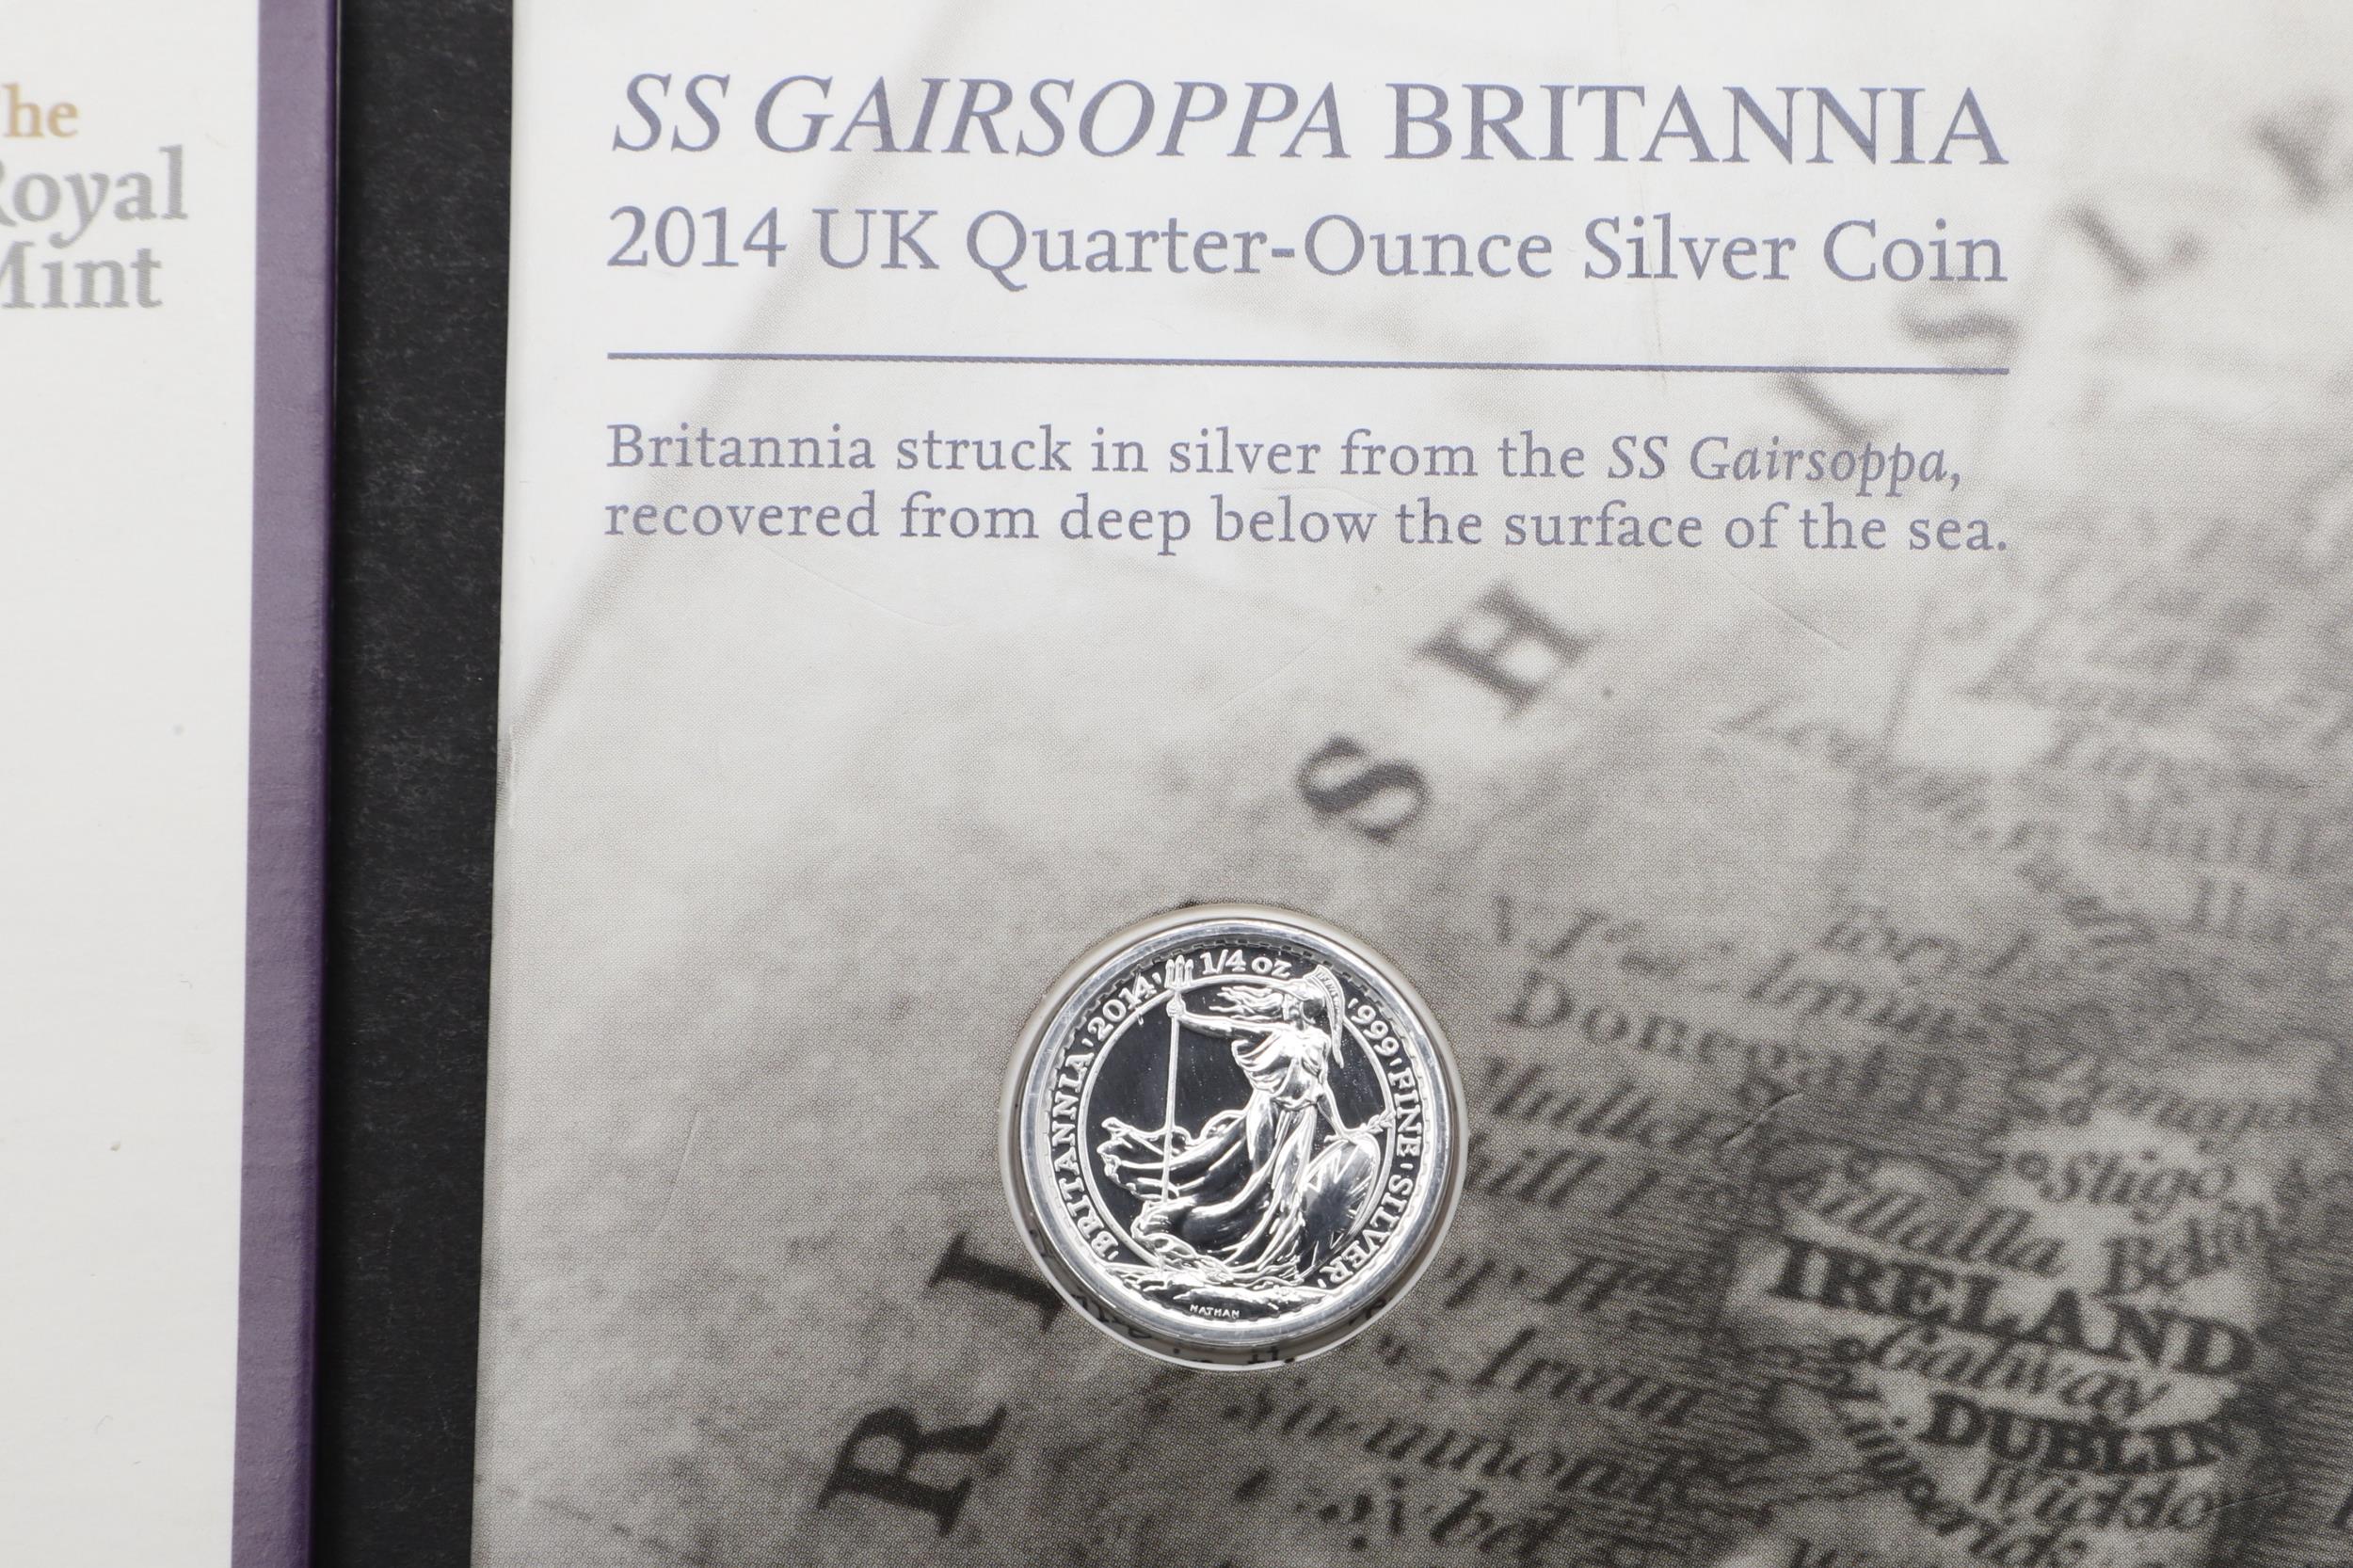 A COLLECTION OF ROYAL MINT RECENT HIGH VALUE SILVER ISSUES TO INCLUDE A 2015 £100 COIN. - Image 3 of 6